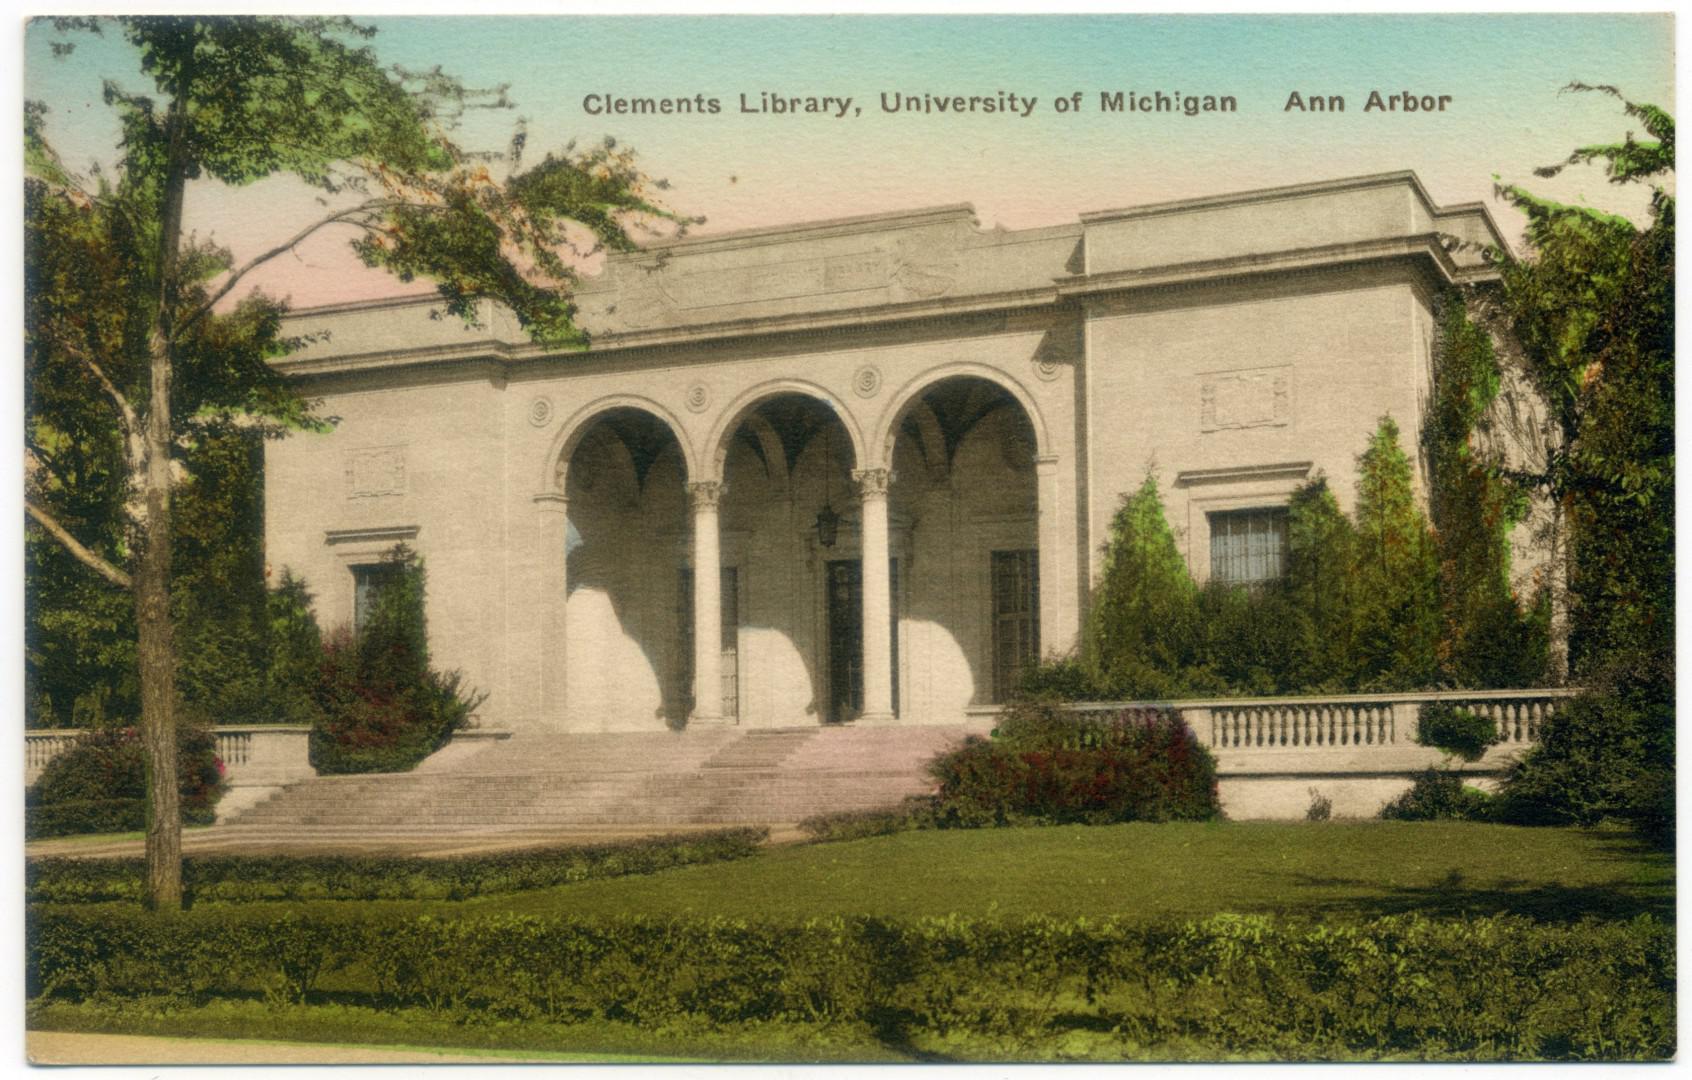 Ann Arbor: University of Michigan, William L. Clements Library